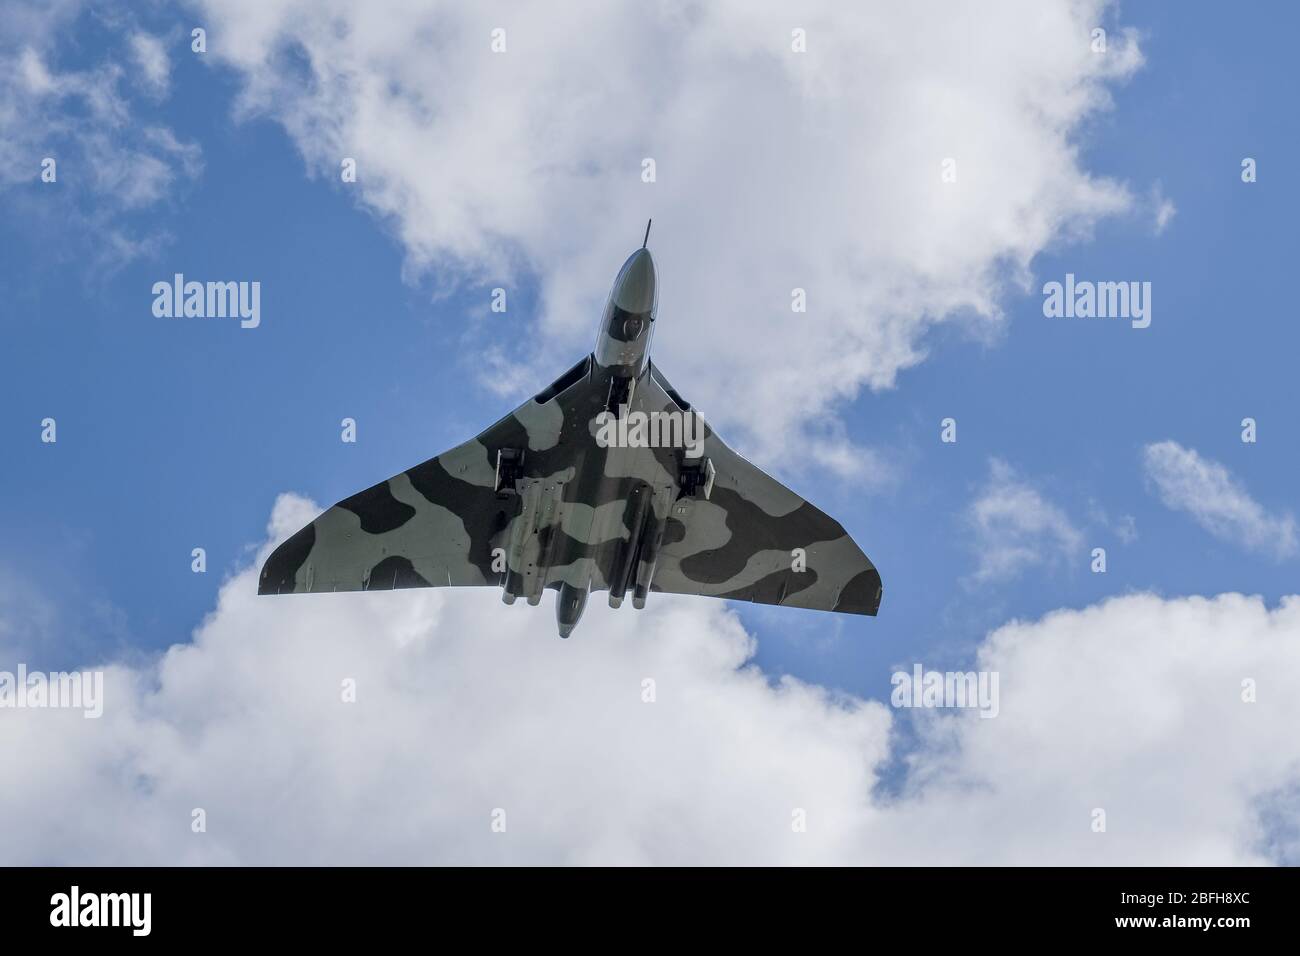 Vulcan Bomber XH558 in flight on it's final tour of the UK prior to being grounded in 2015. Stock Photo